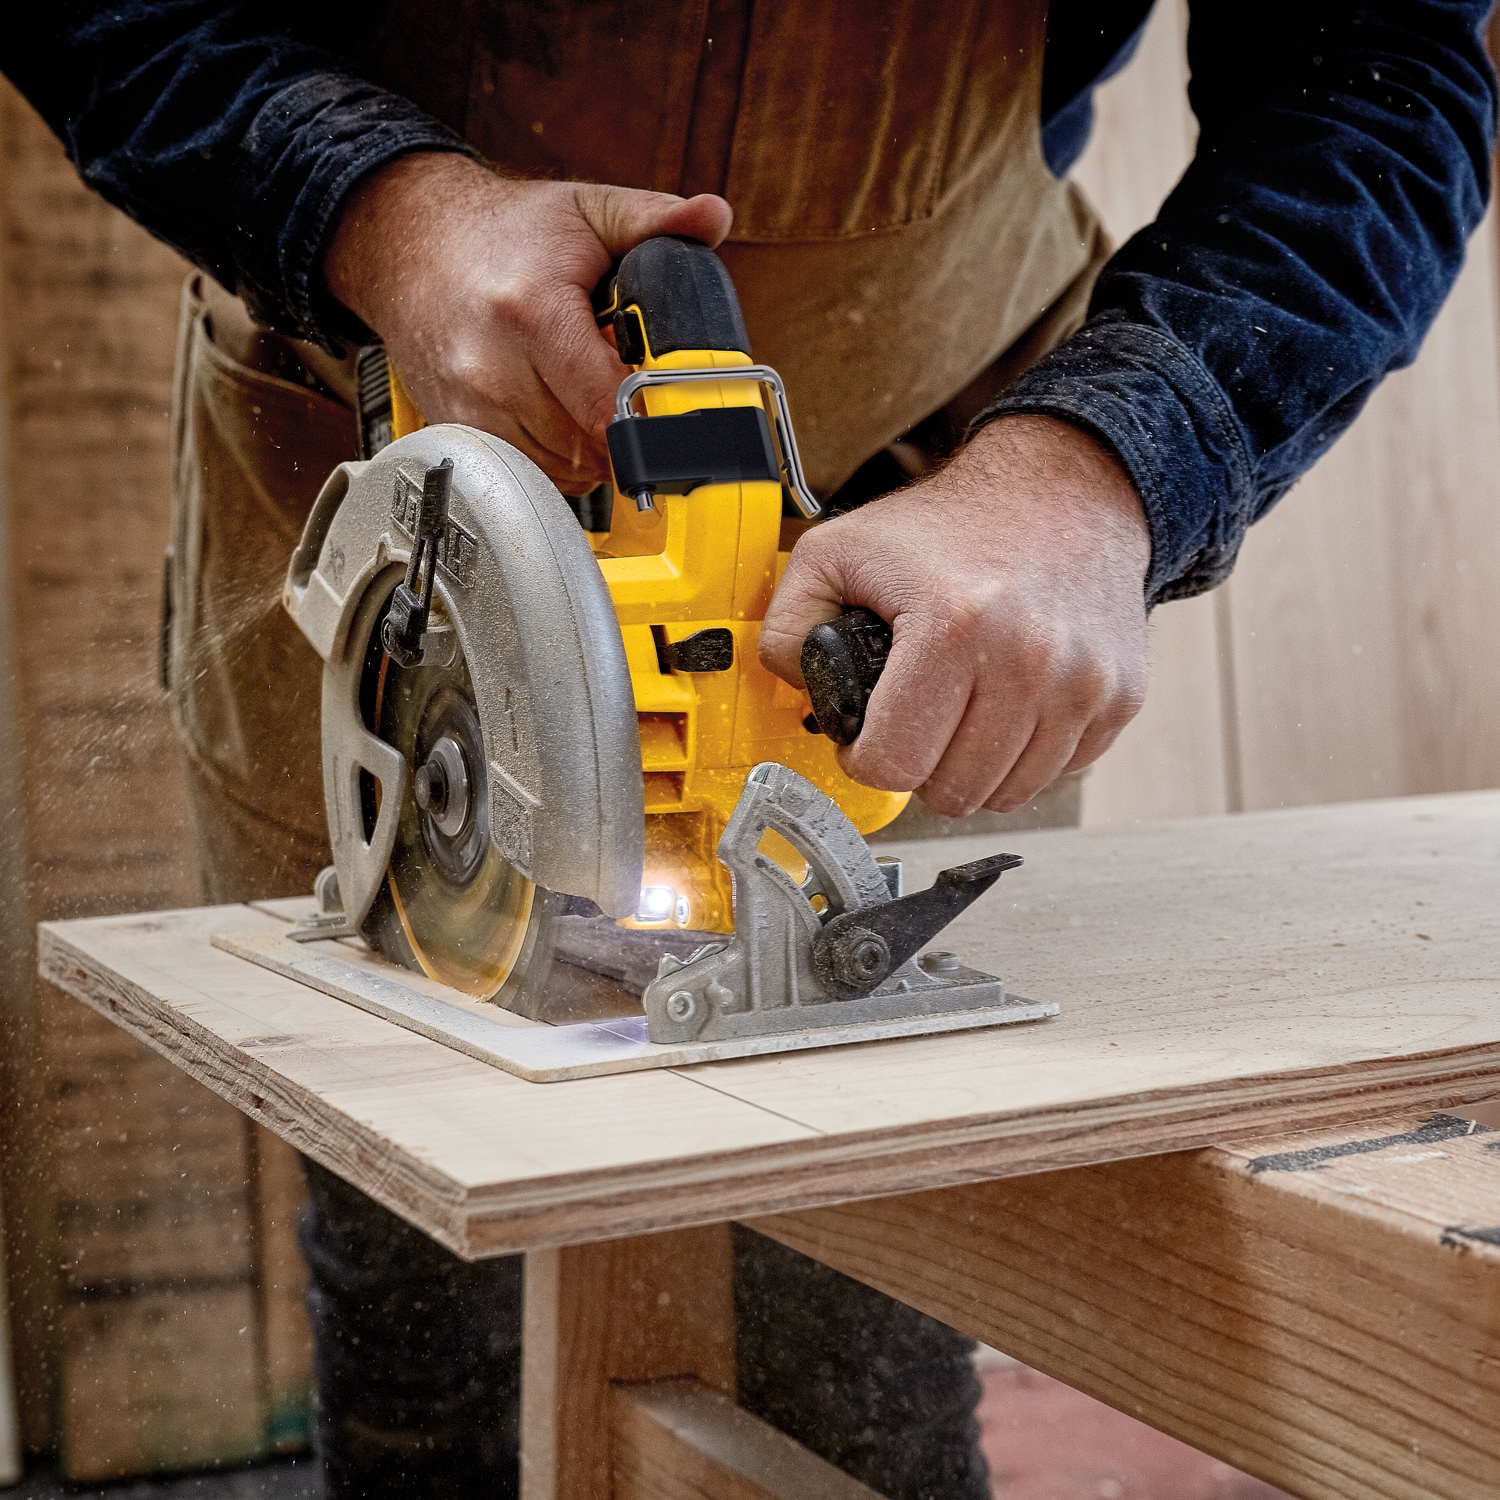 DEWALT XR 20-volt Max 7-1/4-in Brushless Cordless Circular Saw Kit  (1-Battery  Charger Included) in the Circular Saws department at